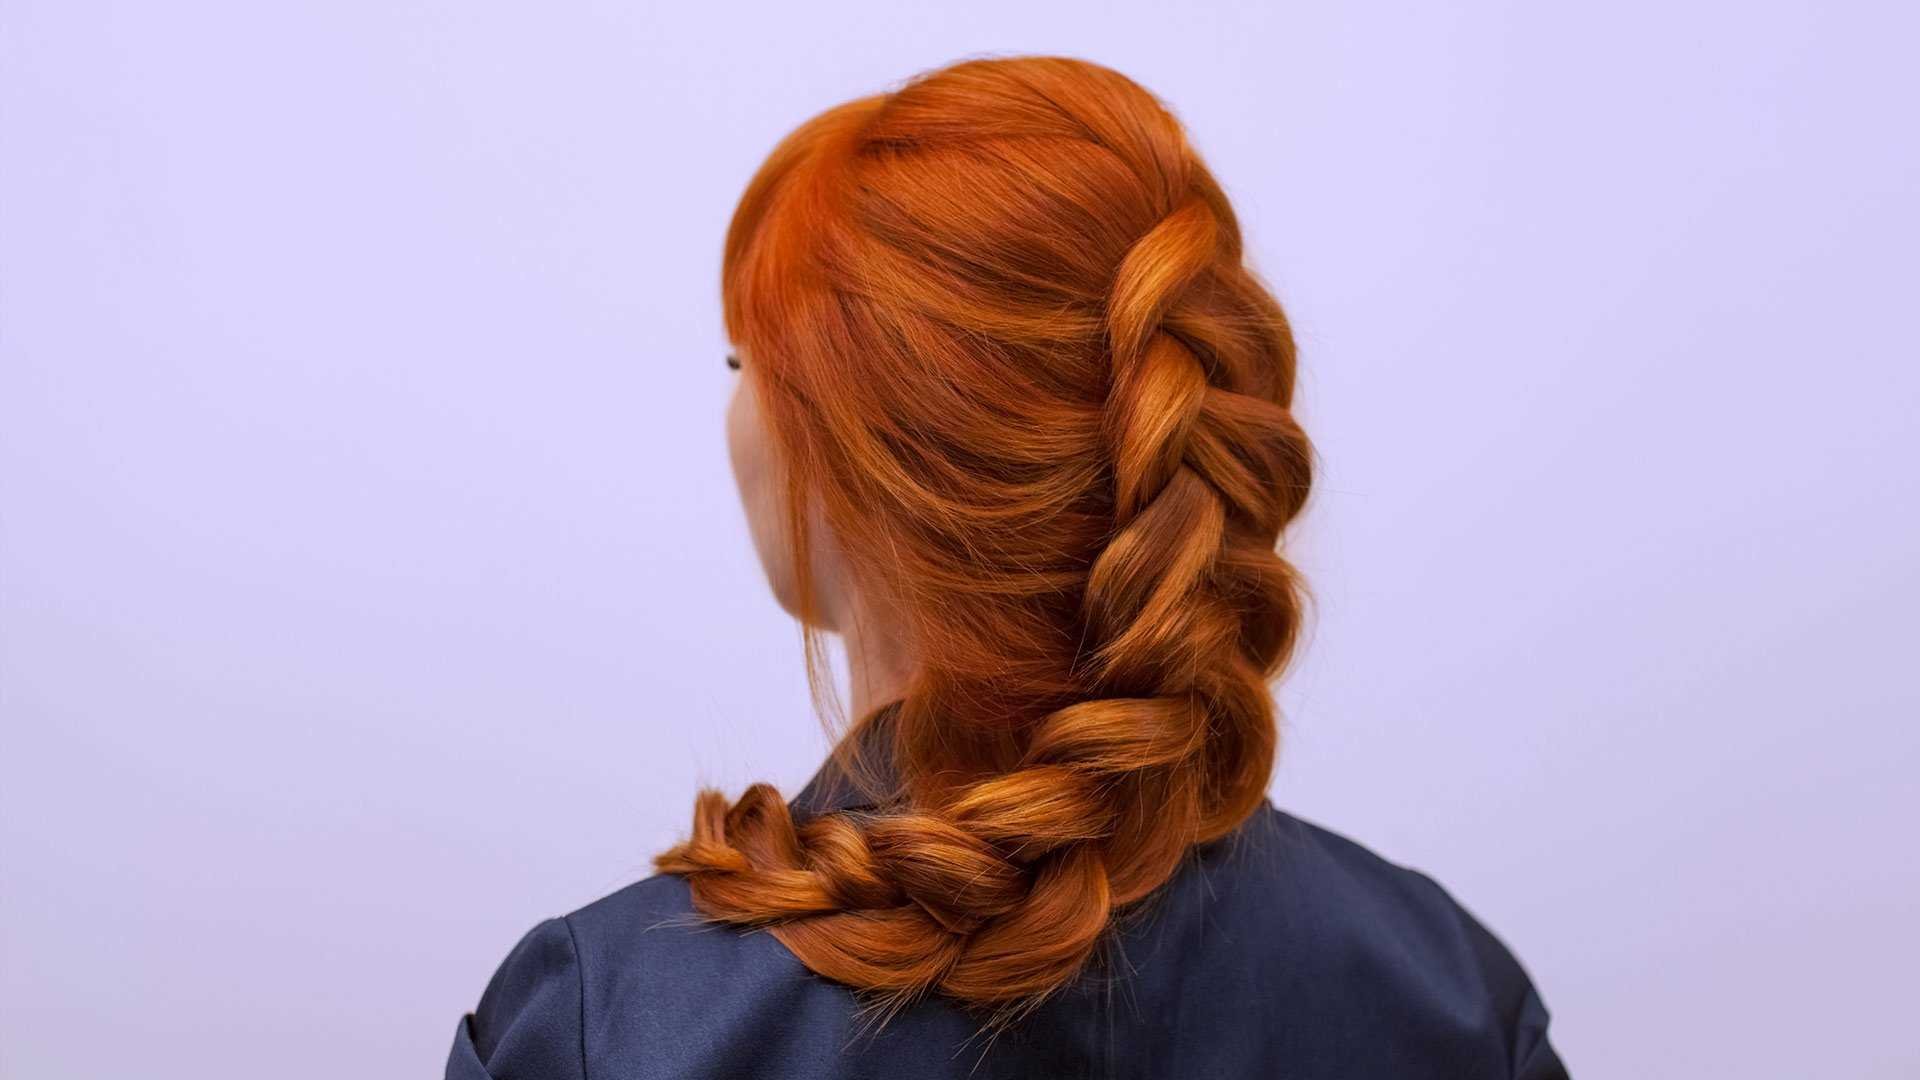 31 Braided Hairstyles That Are Easy and Gorgeous - L'Oréal Paris